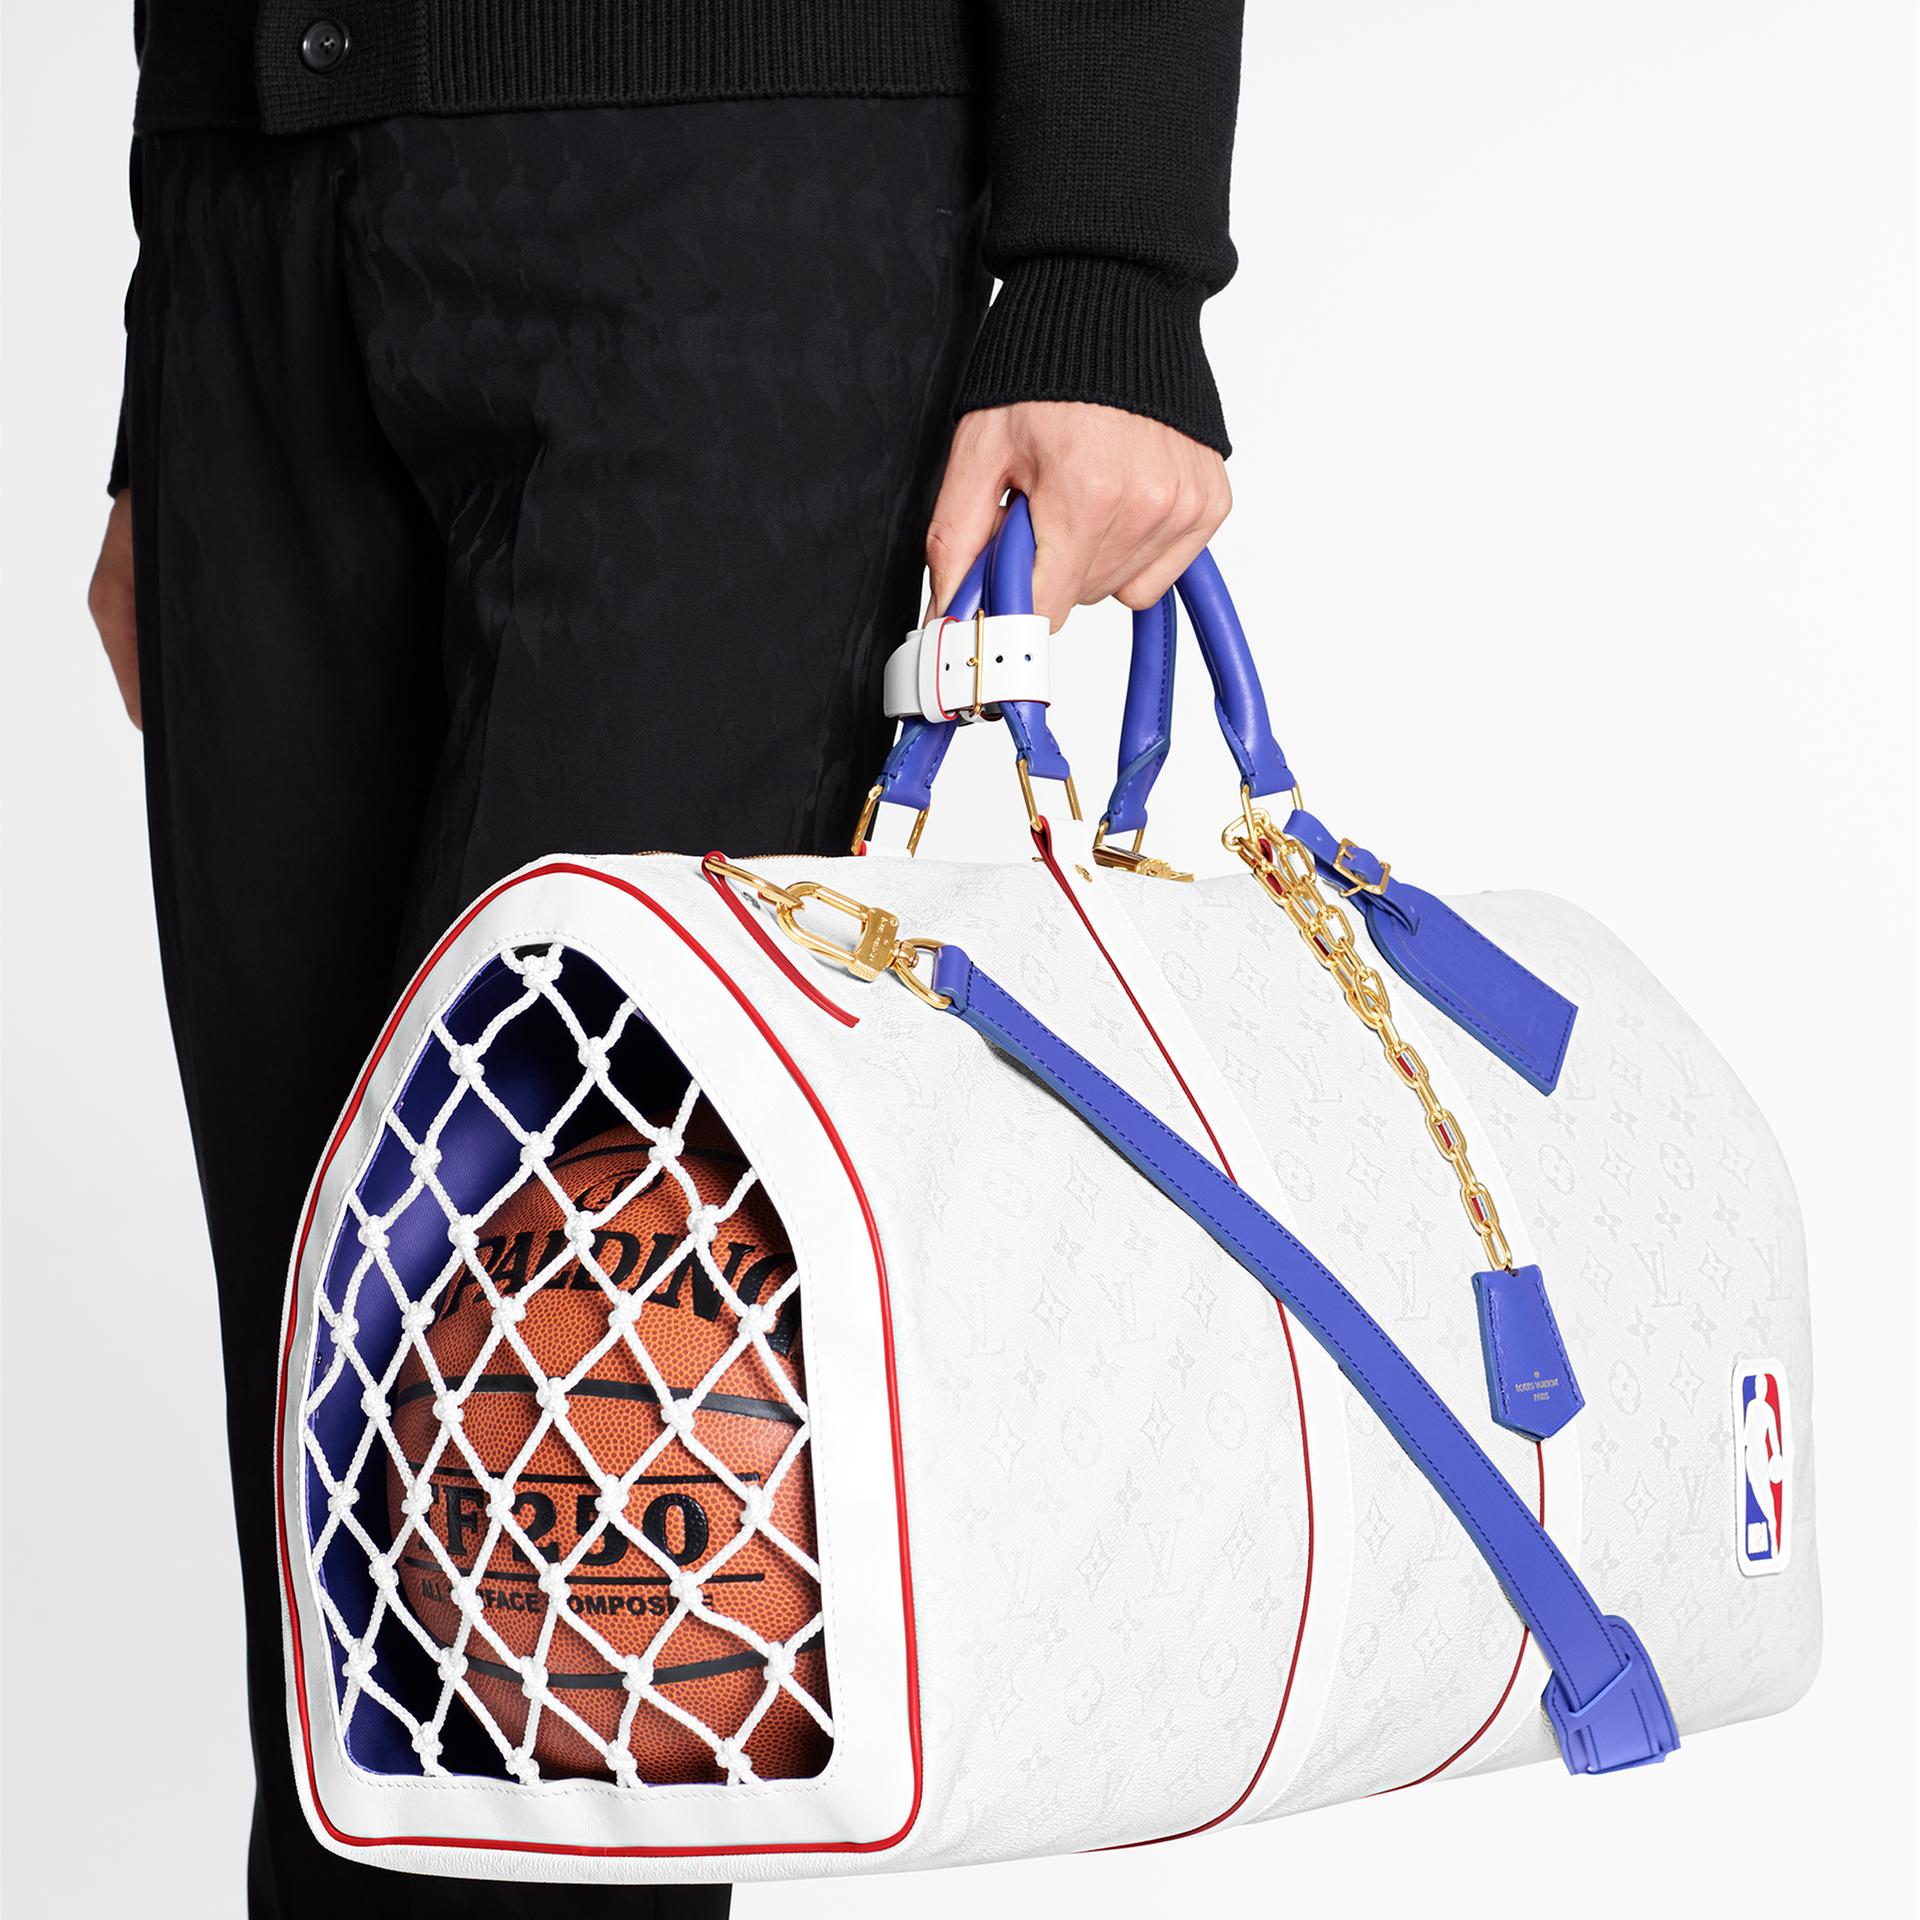 Virgil Abloh's latest Louis Vuitton capsule is in collaboration with the NBA